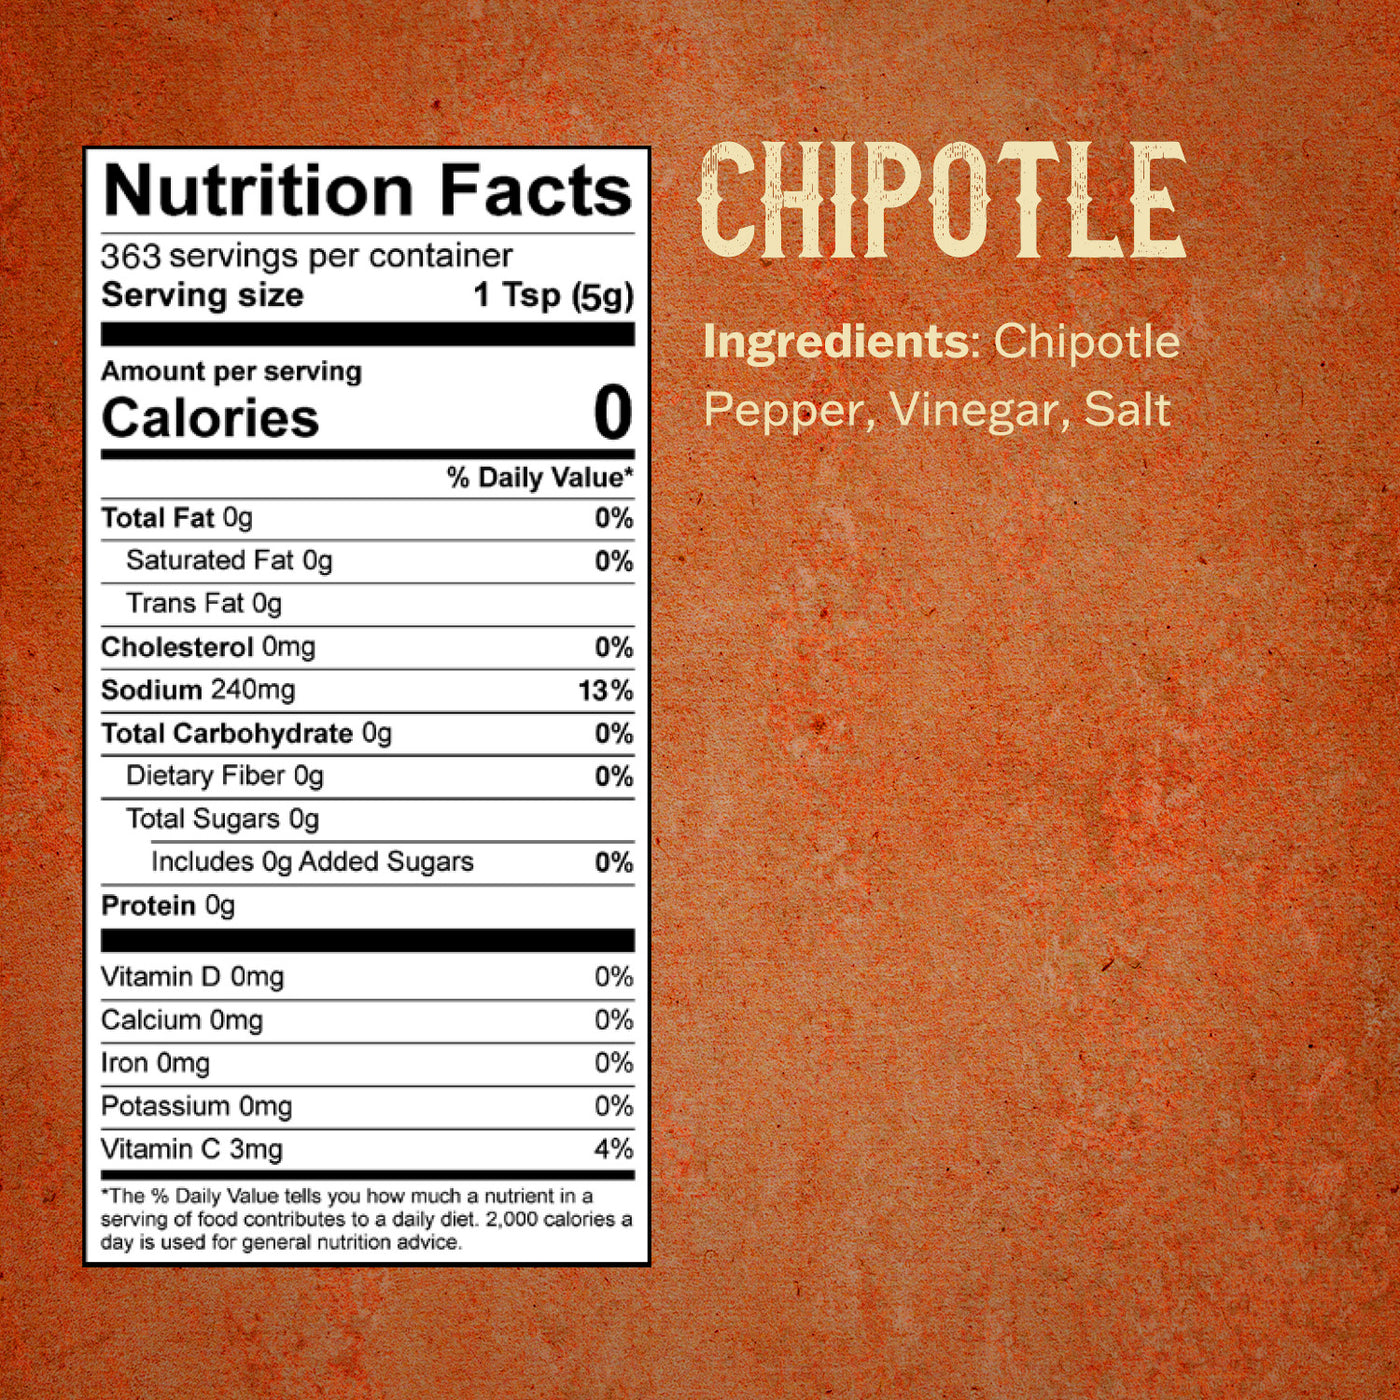 Food Service 64oz Chipotle Pepper Puree from Louisiana Pepper Exchange